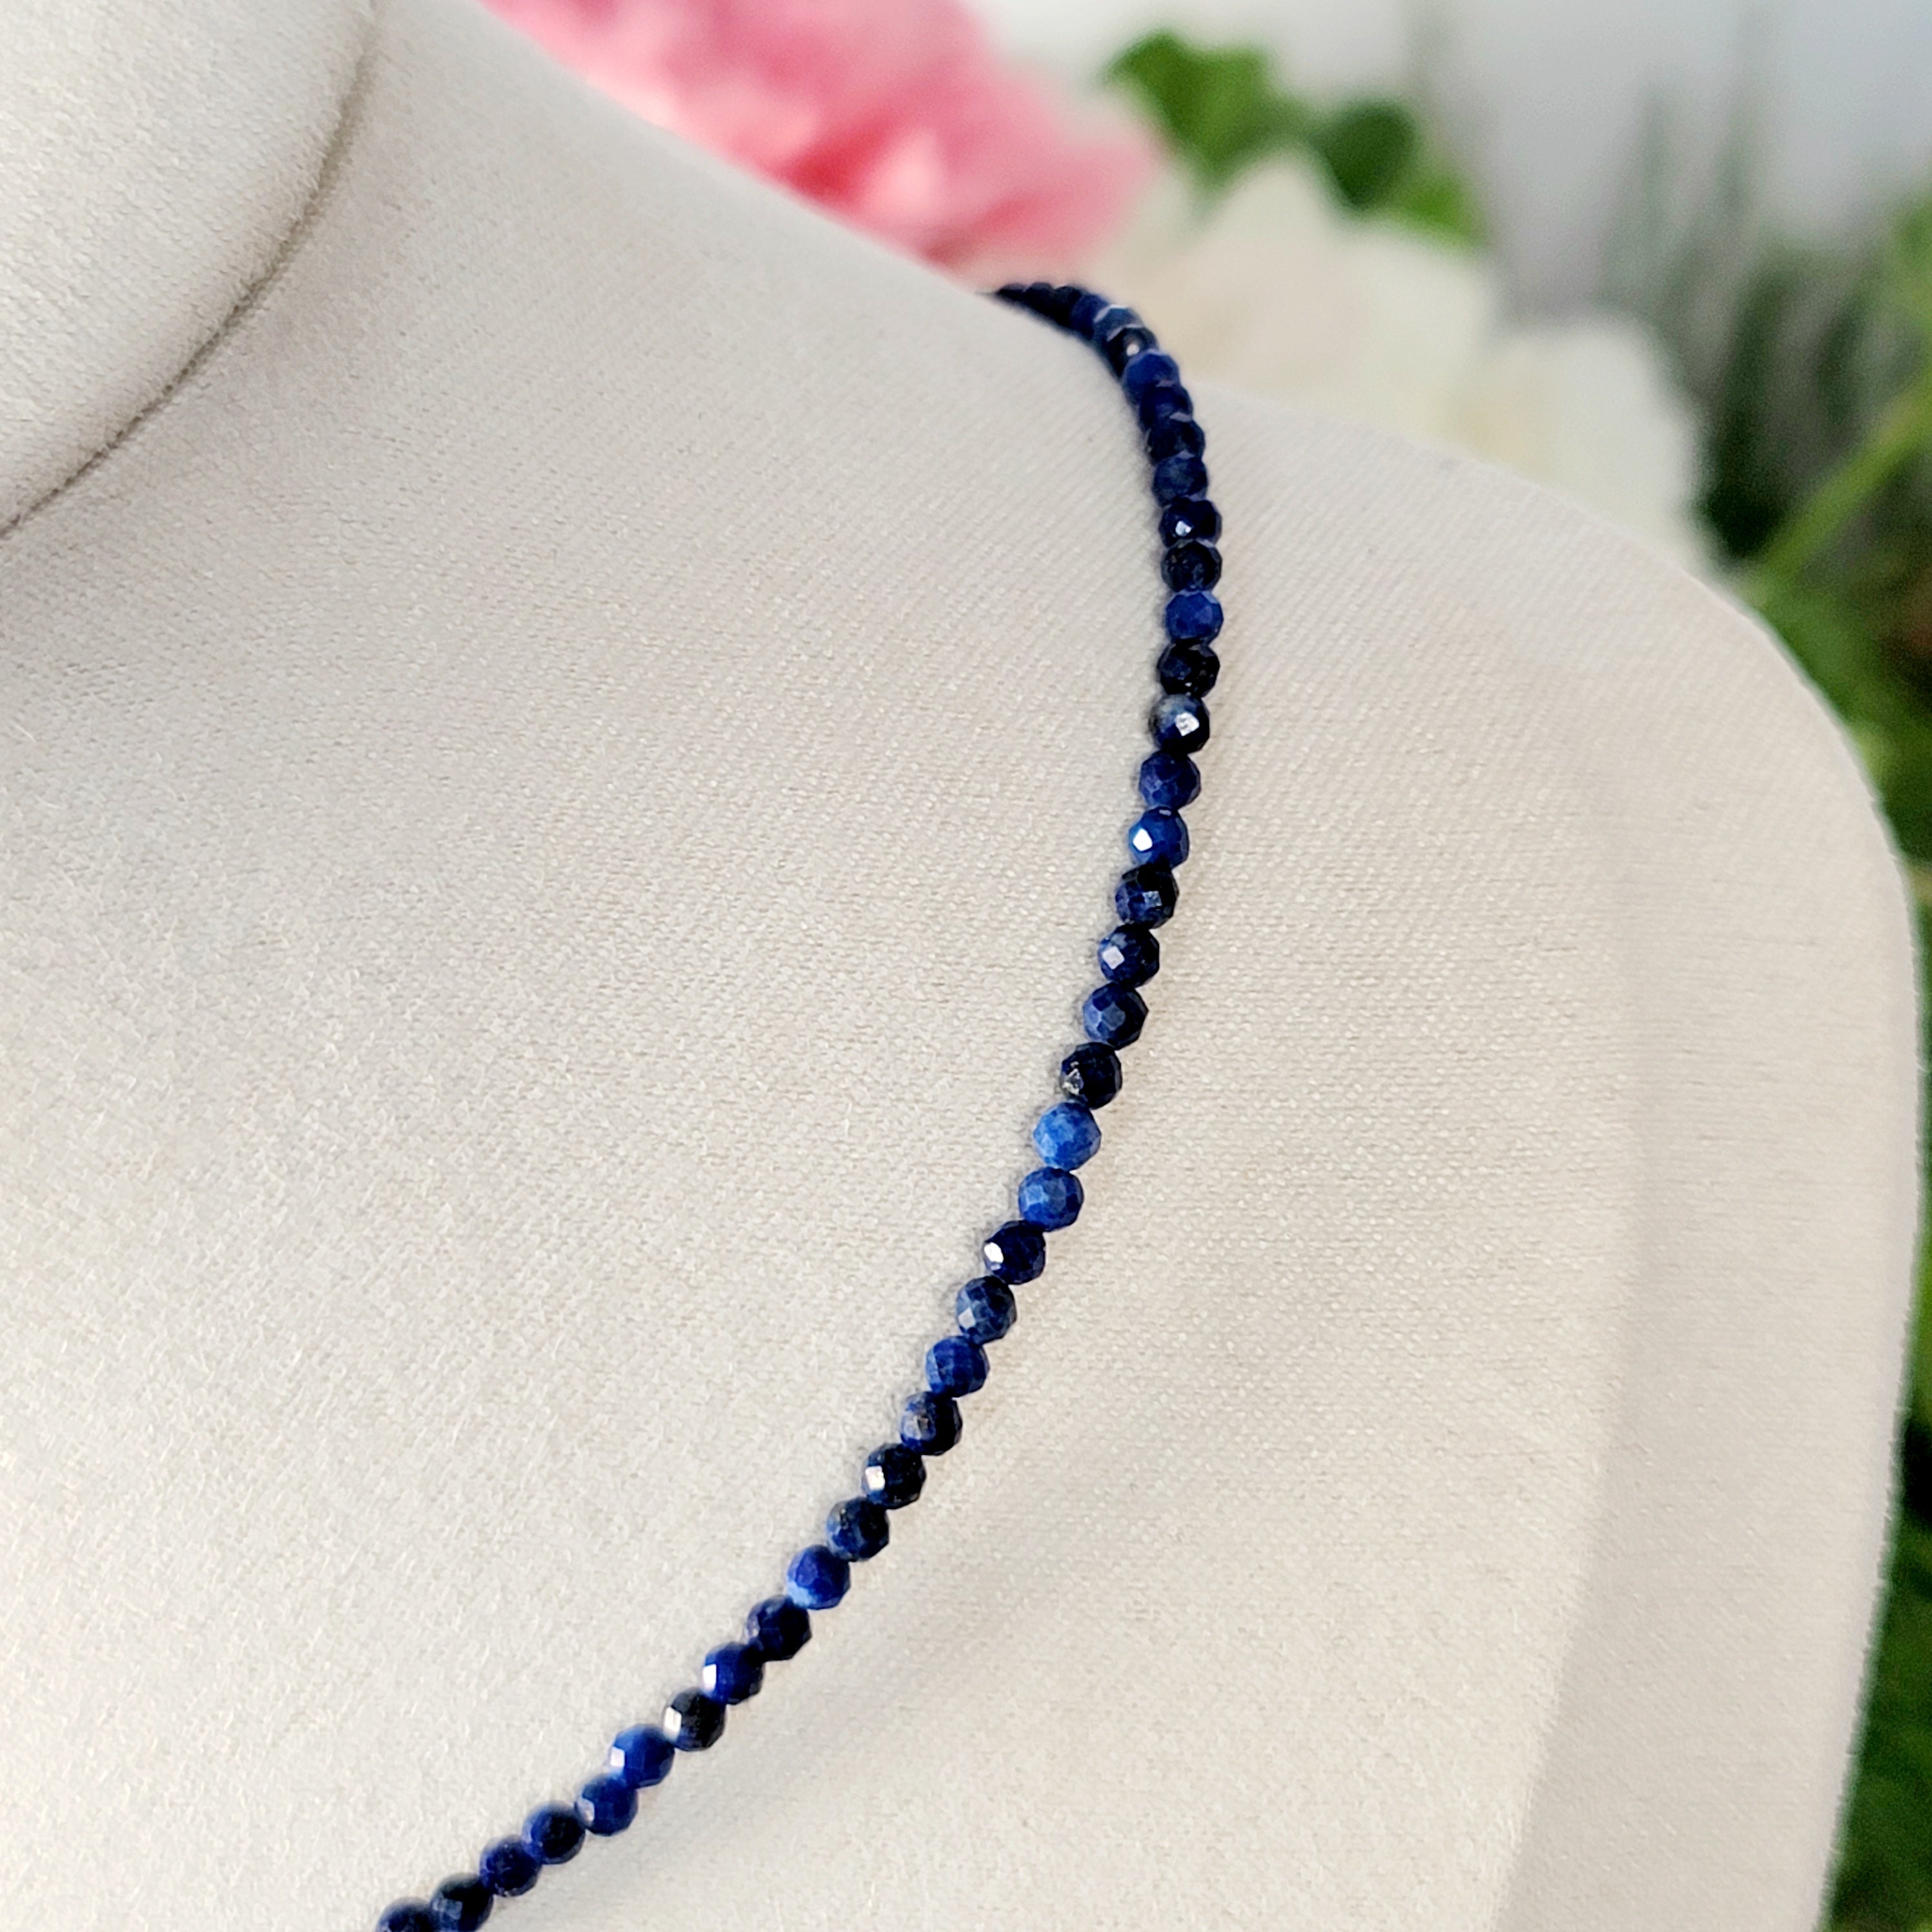 Lapis Lazuli Micro Faceted Choker/Layering Necklace for Awakening and Empowerment